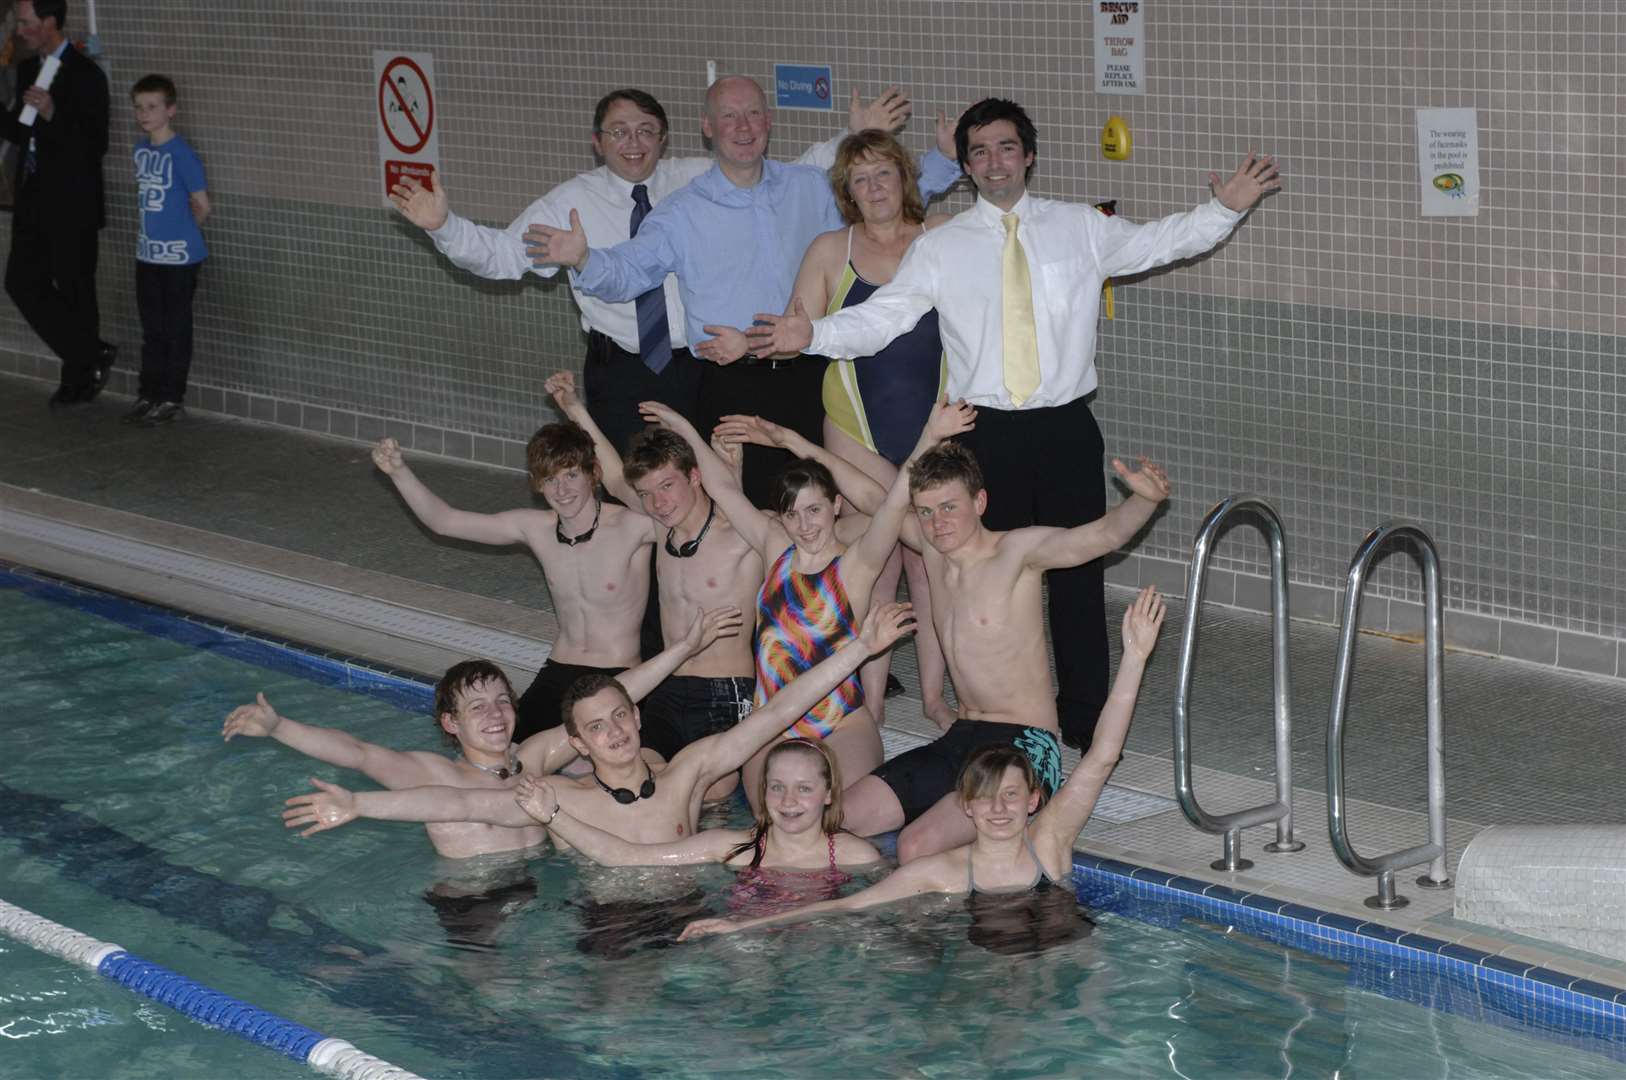 Splashes hosted the official launch of a free swimming for U16s and Over 60s in 2009